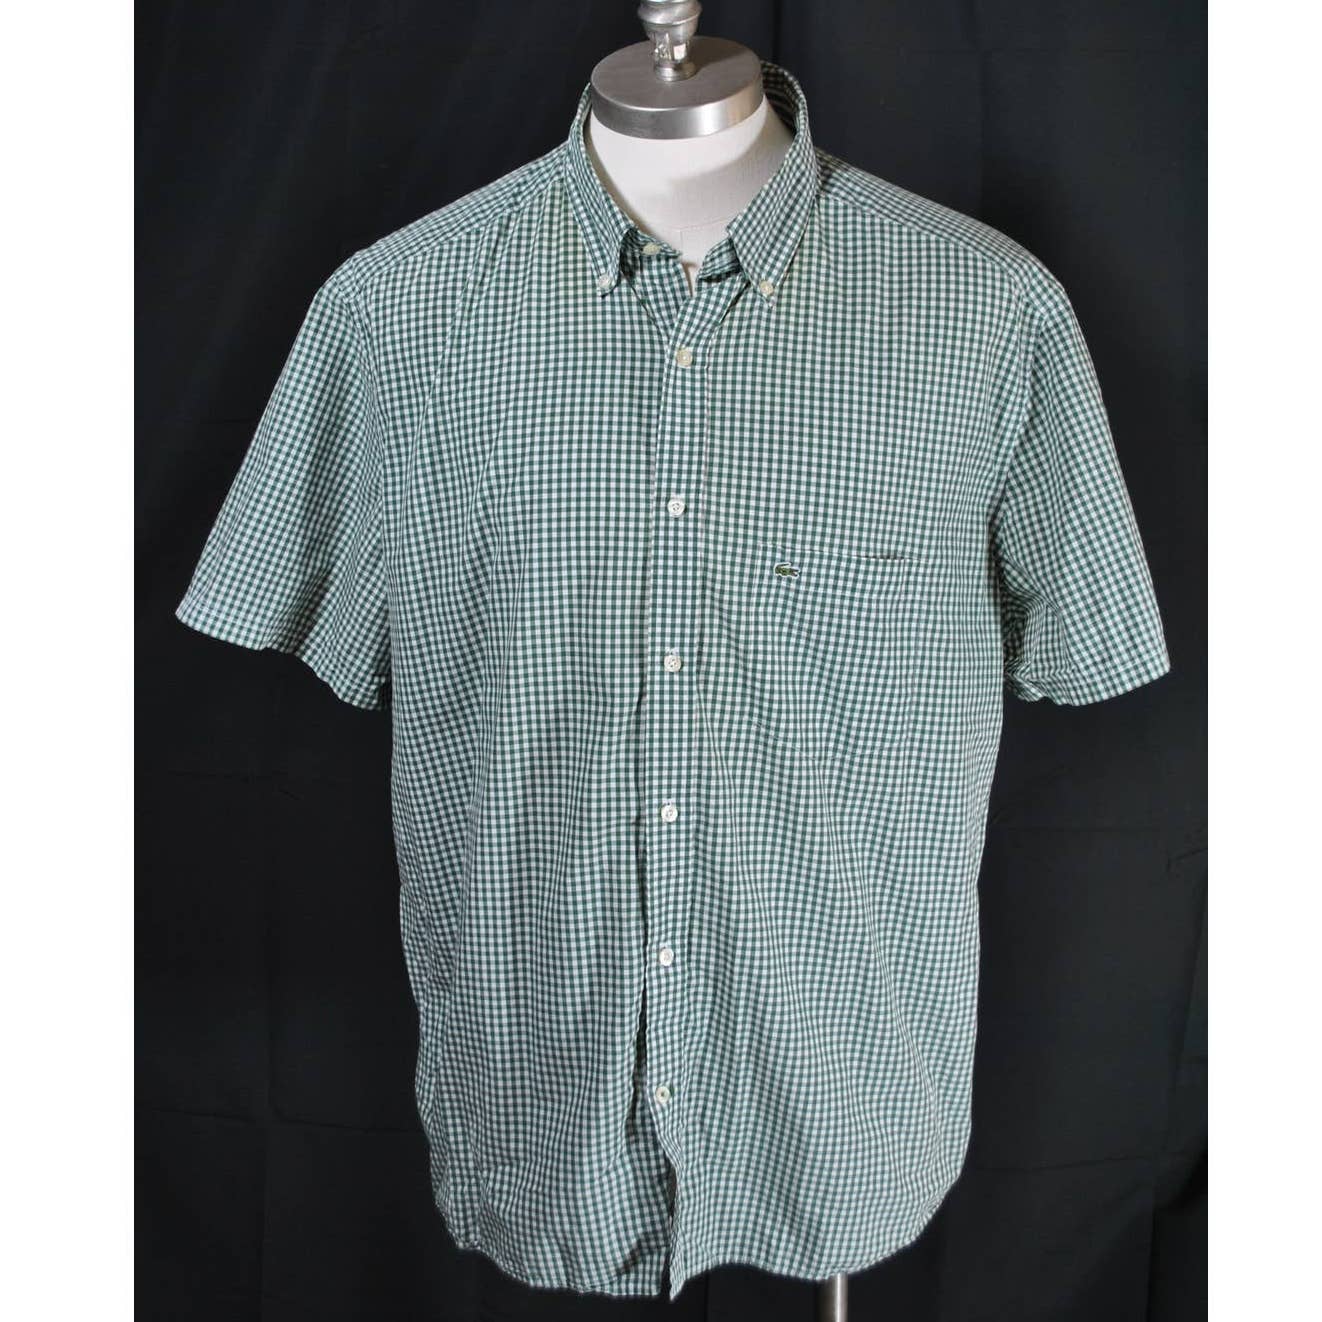 Lacoste Green White Gingham Button Up Shirt - 46